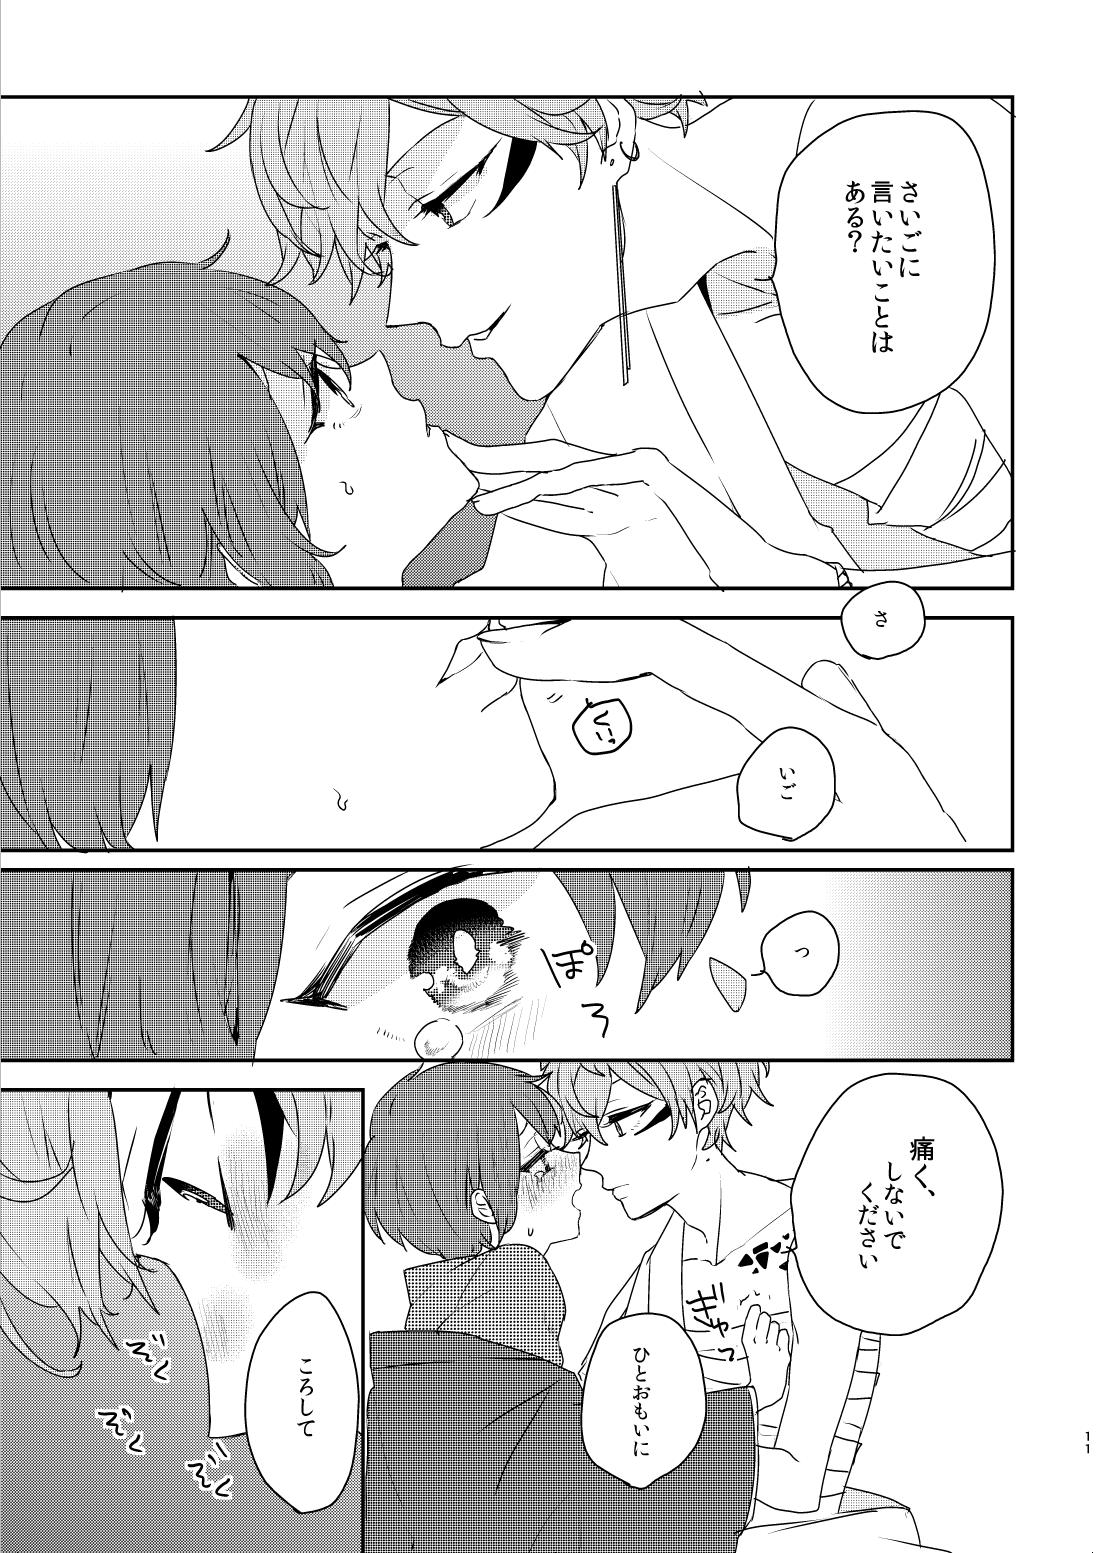 Finger Gin no Toge - Ensemble stars Doggy Style Porn - Page 11